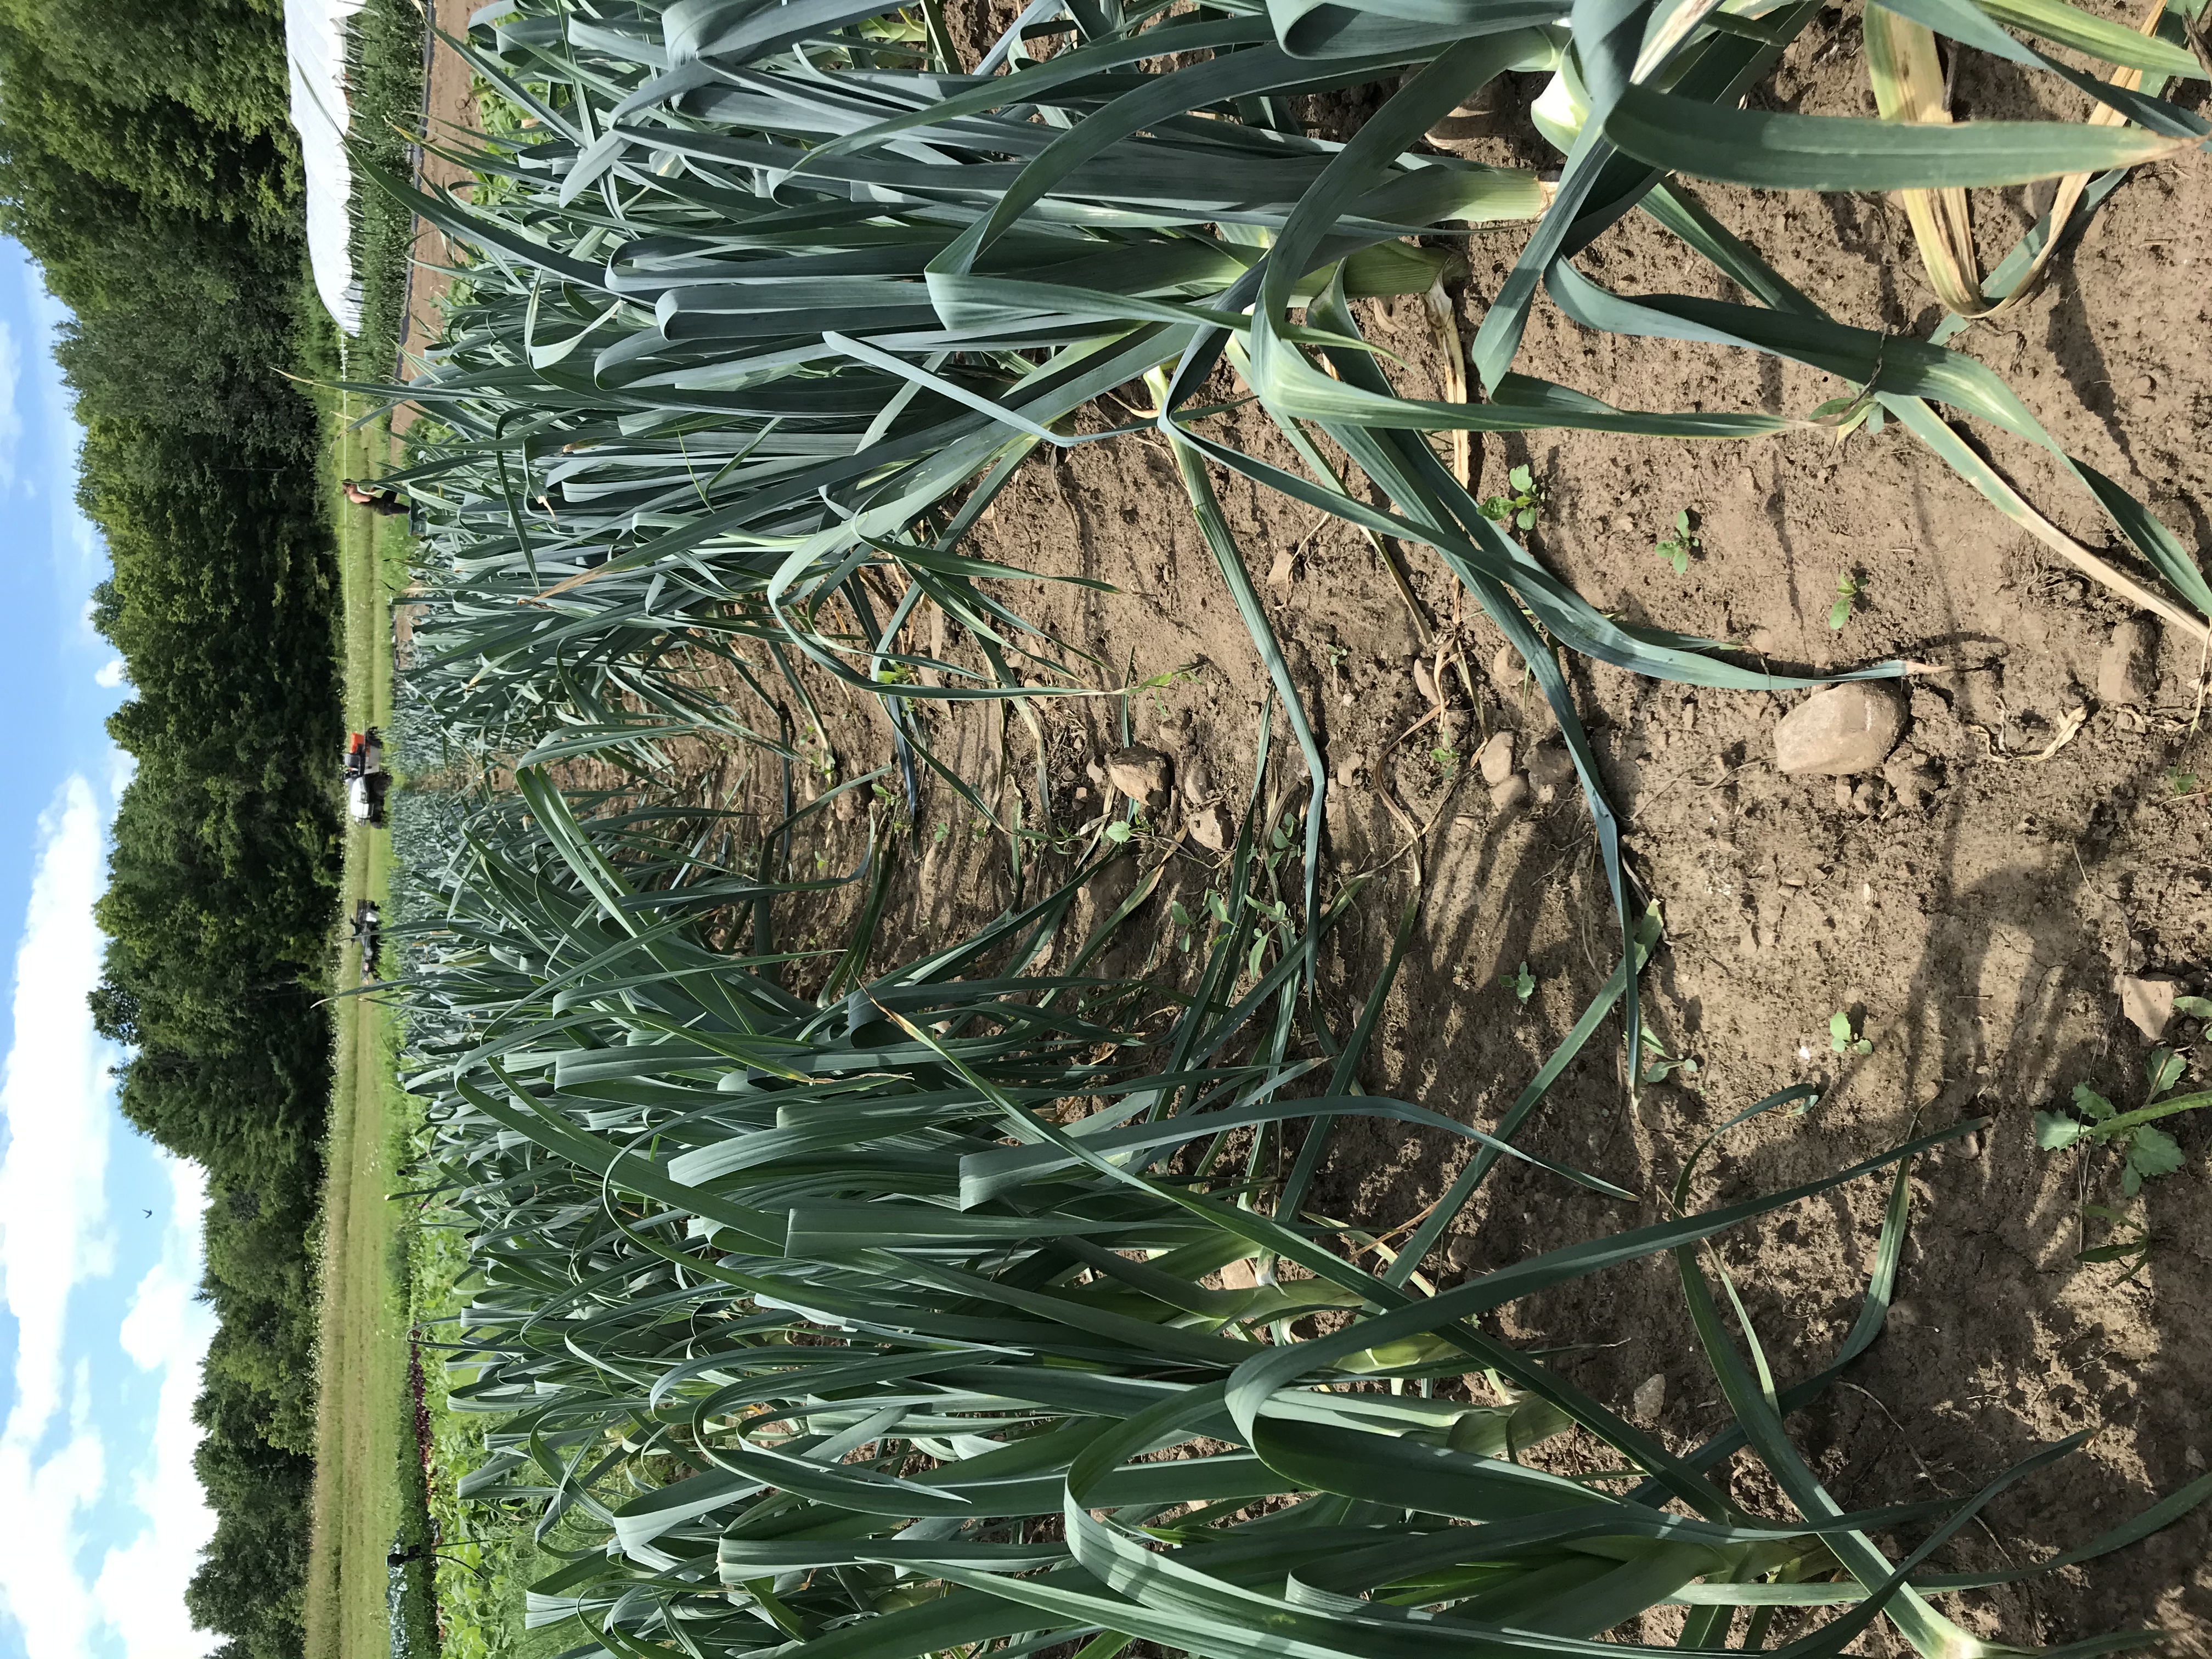 Two beds of leeks stretch out with a plain dirt path in the middle.